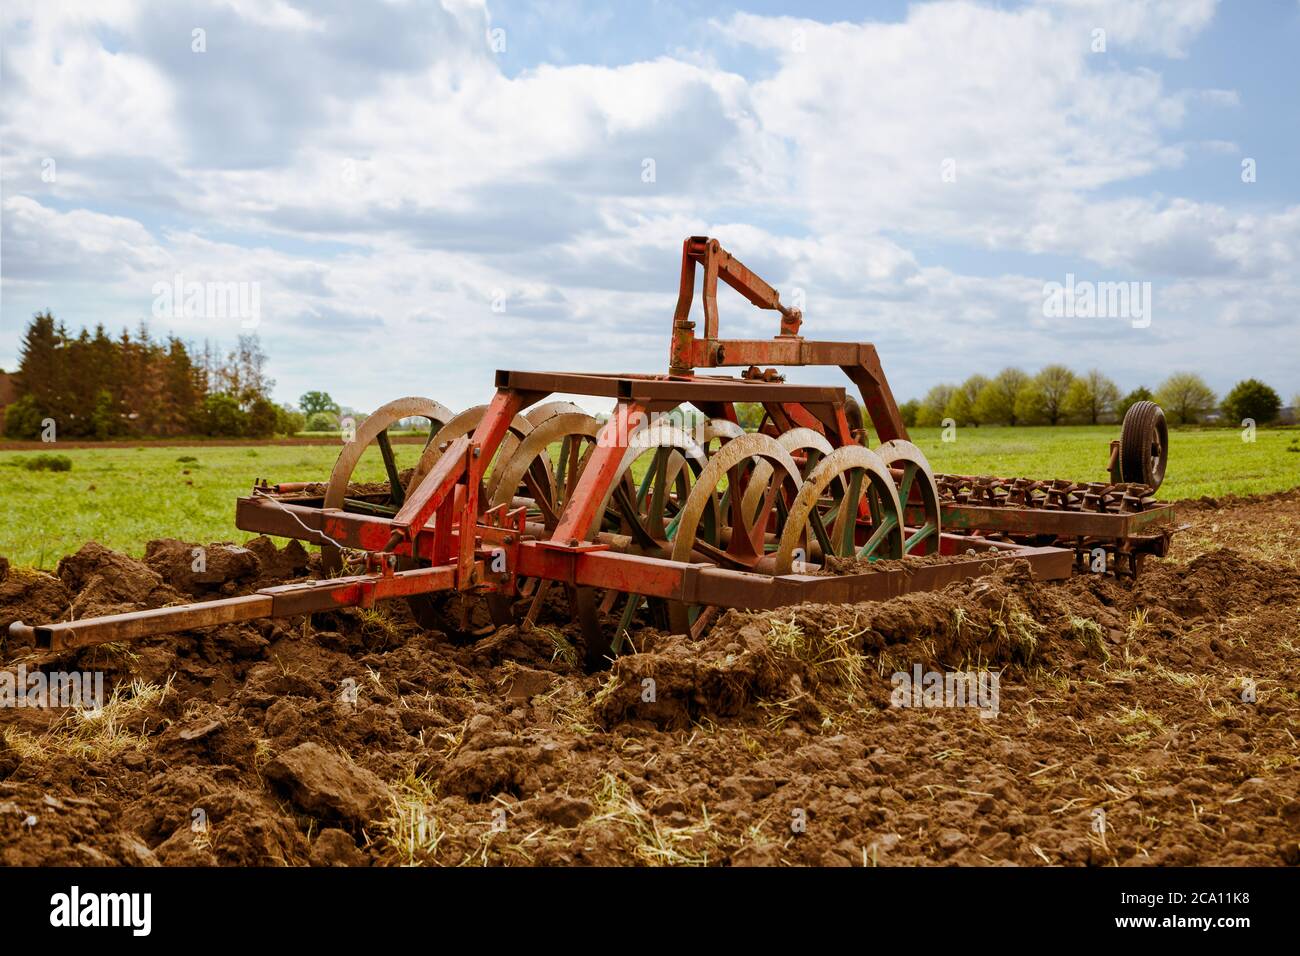 Surface cultivator on ground ready for work at agricultural farmer field Stock Photo